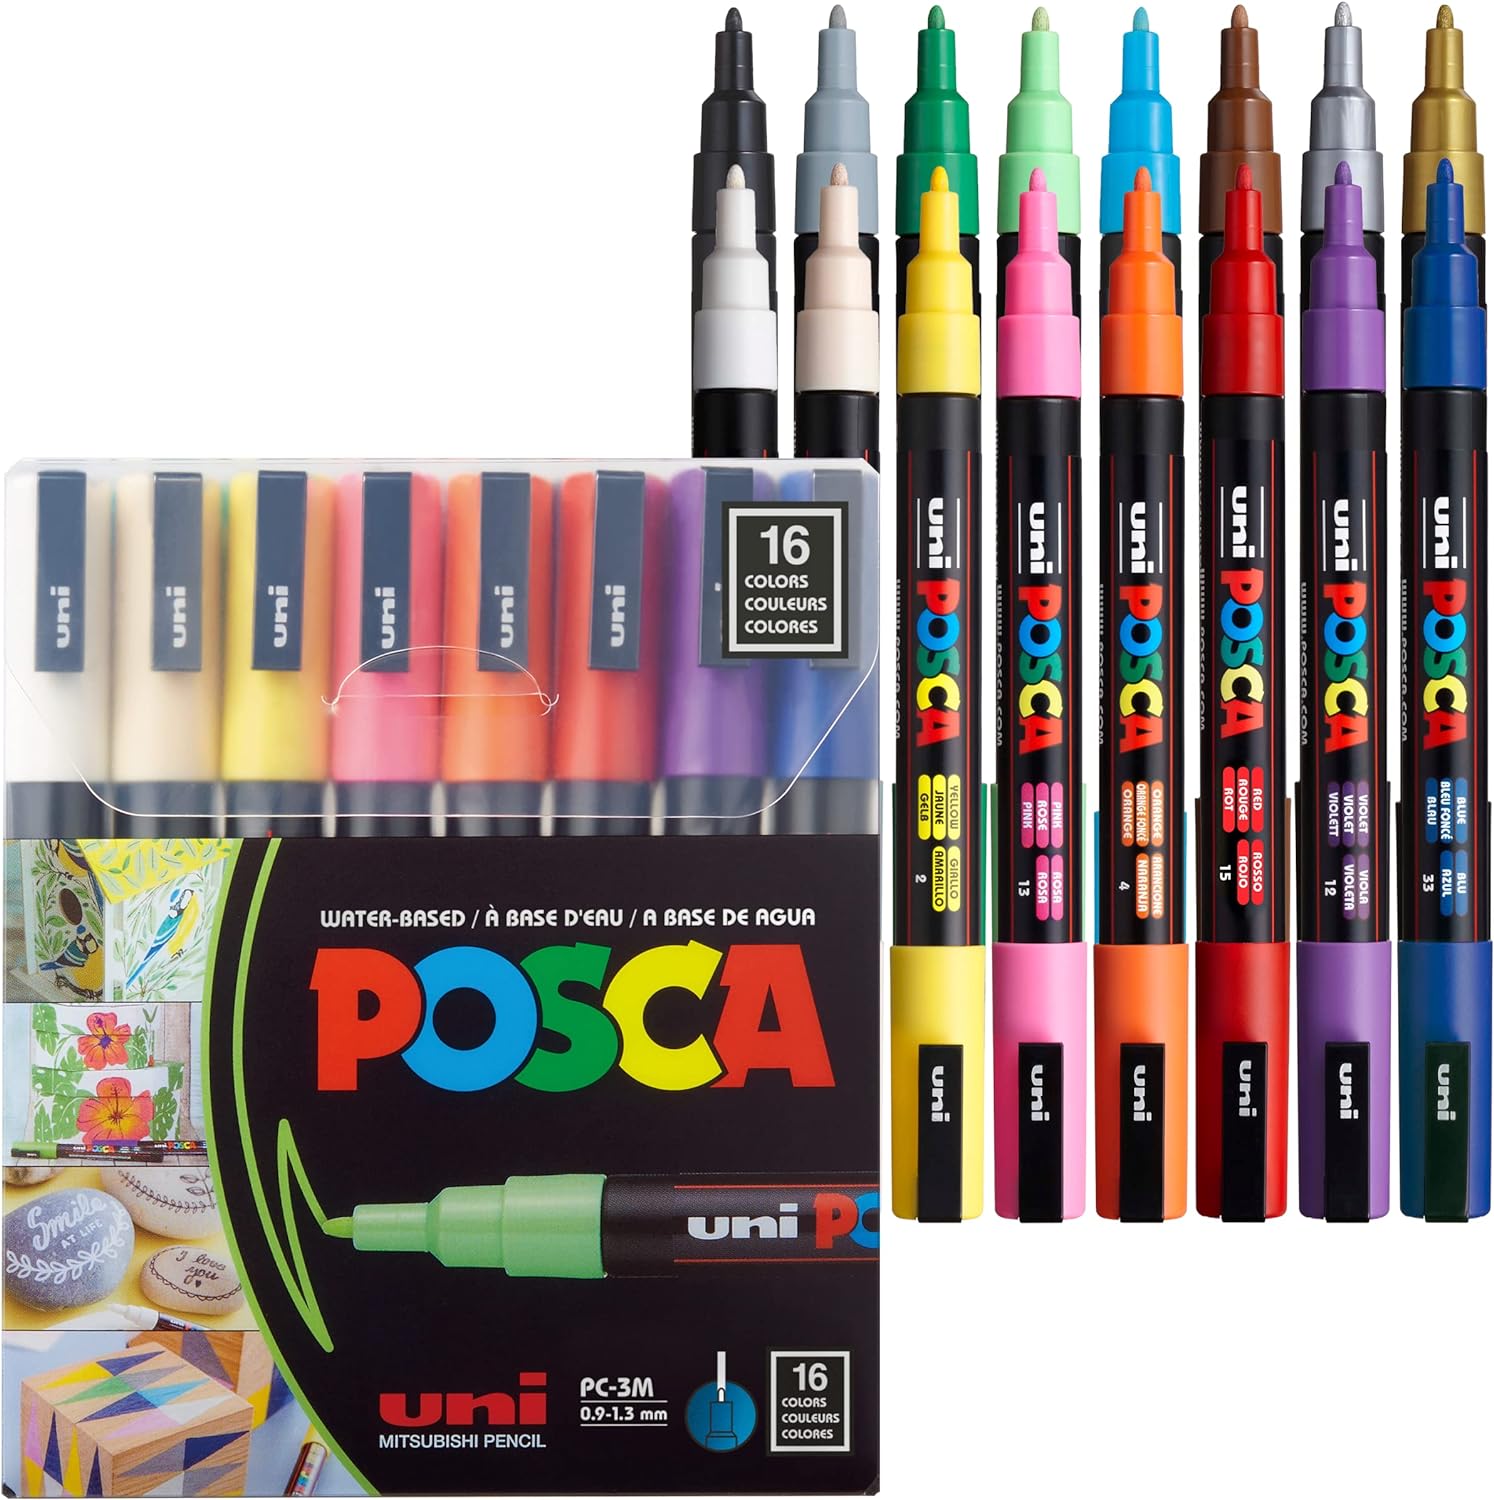 16 Posca Paint Markers, 3M Fine Posca Markers with Reve